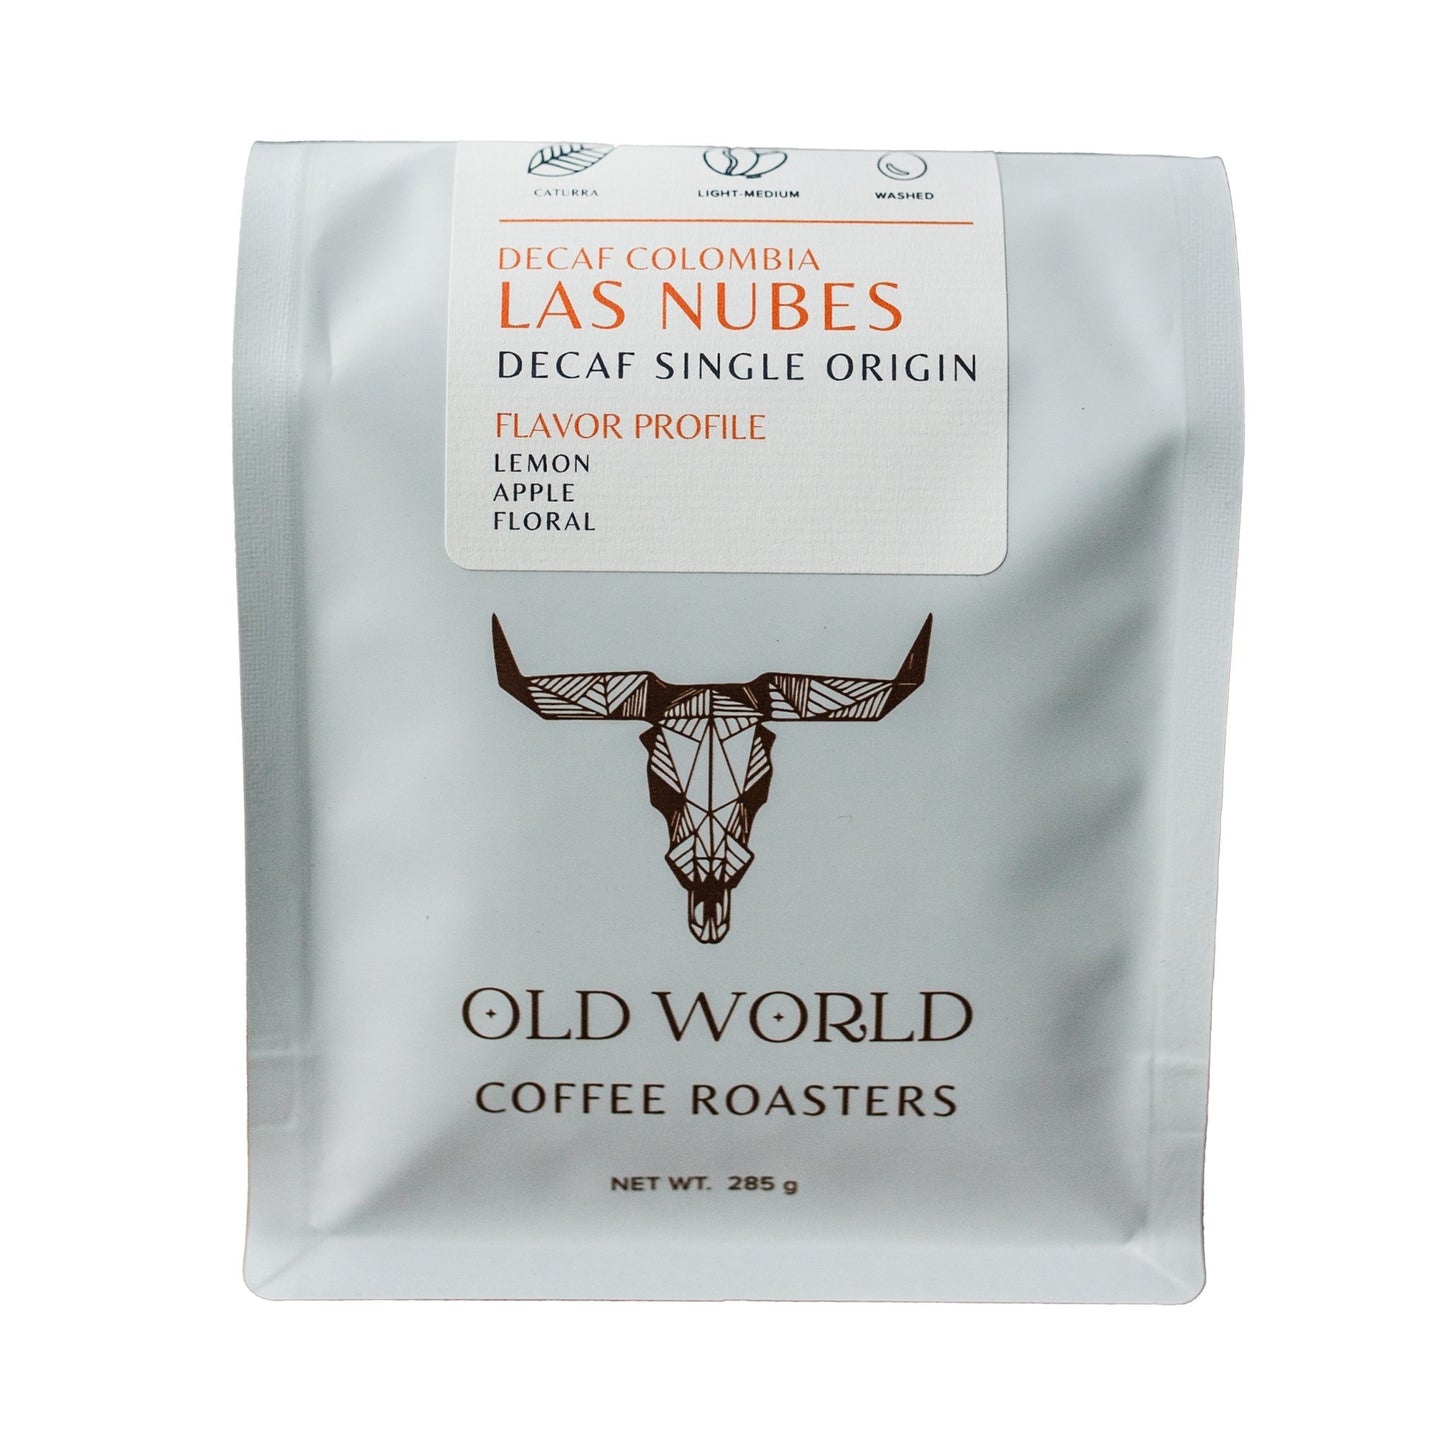 Decaf - Colombia - Las Nubes - Old World Coffee Roasters